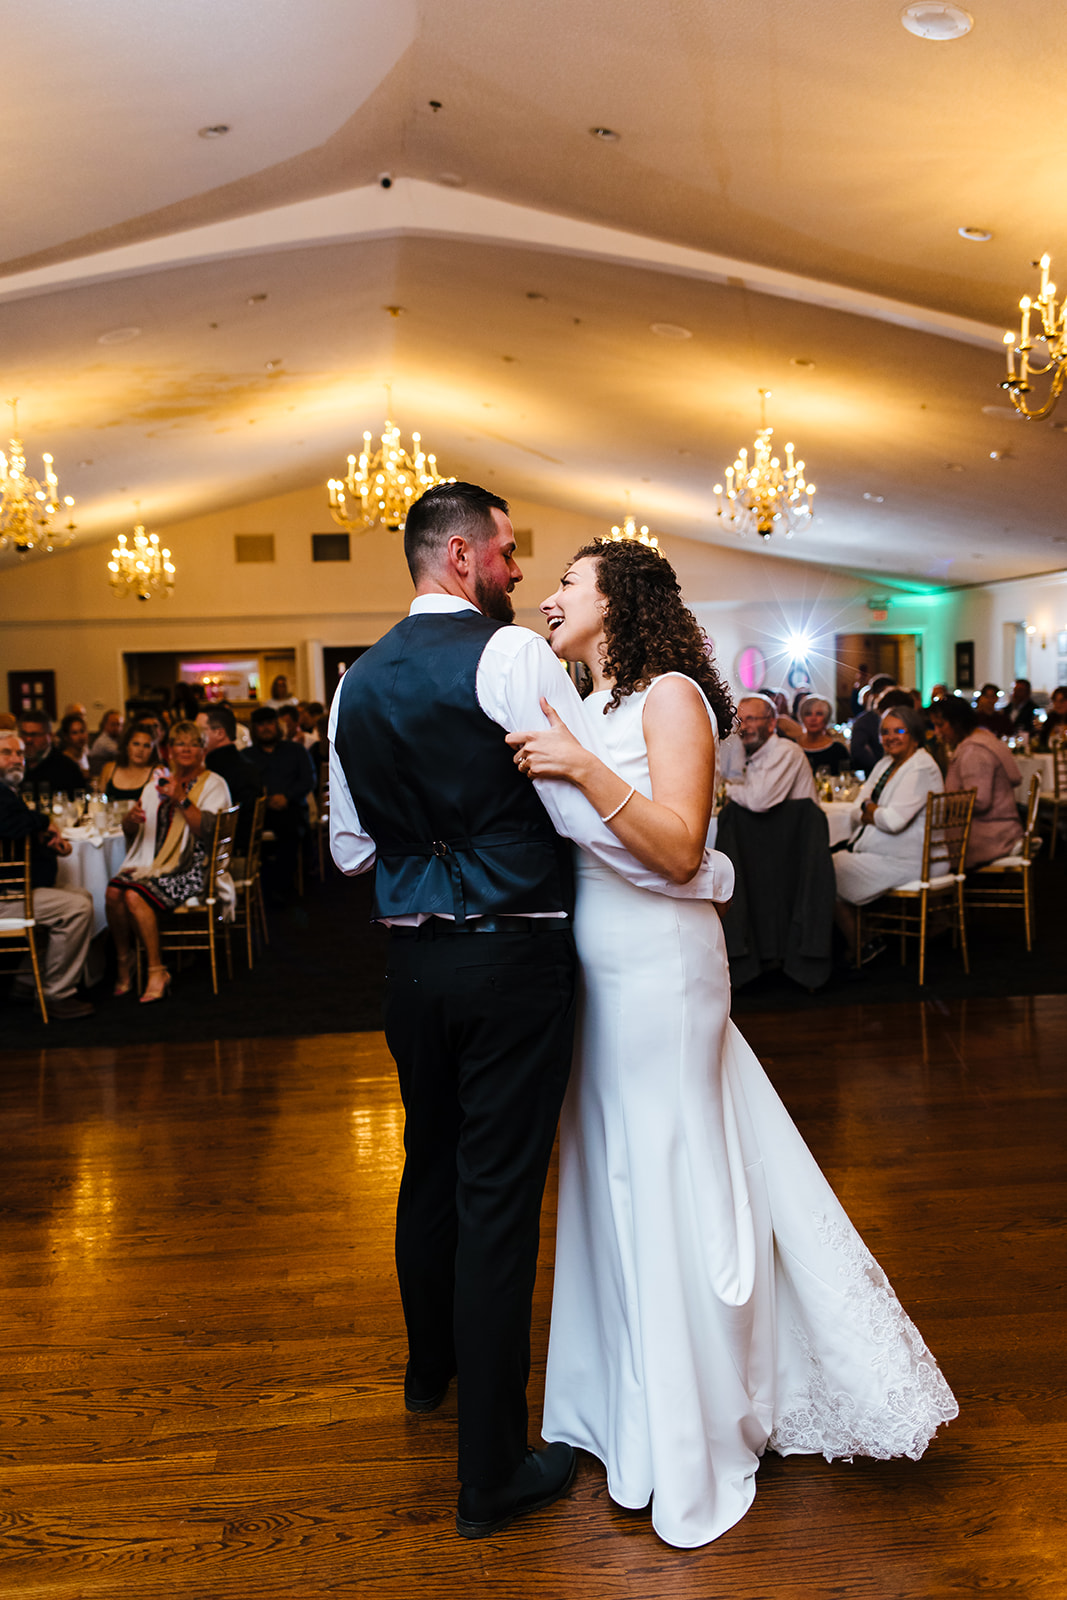 Bride and groom happily share a first dance at Traditions in Syracuse, NY.